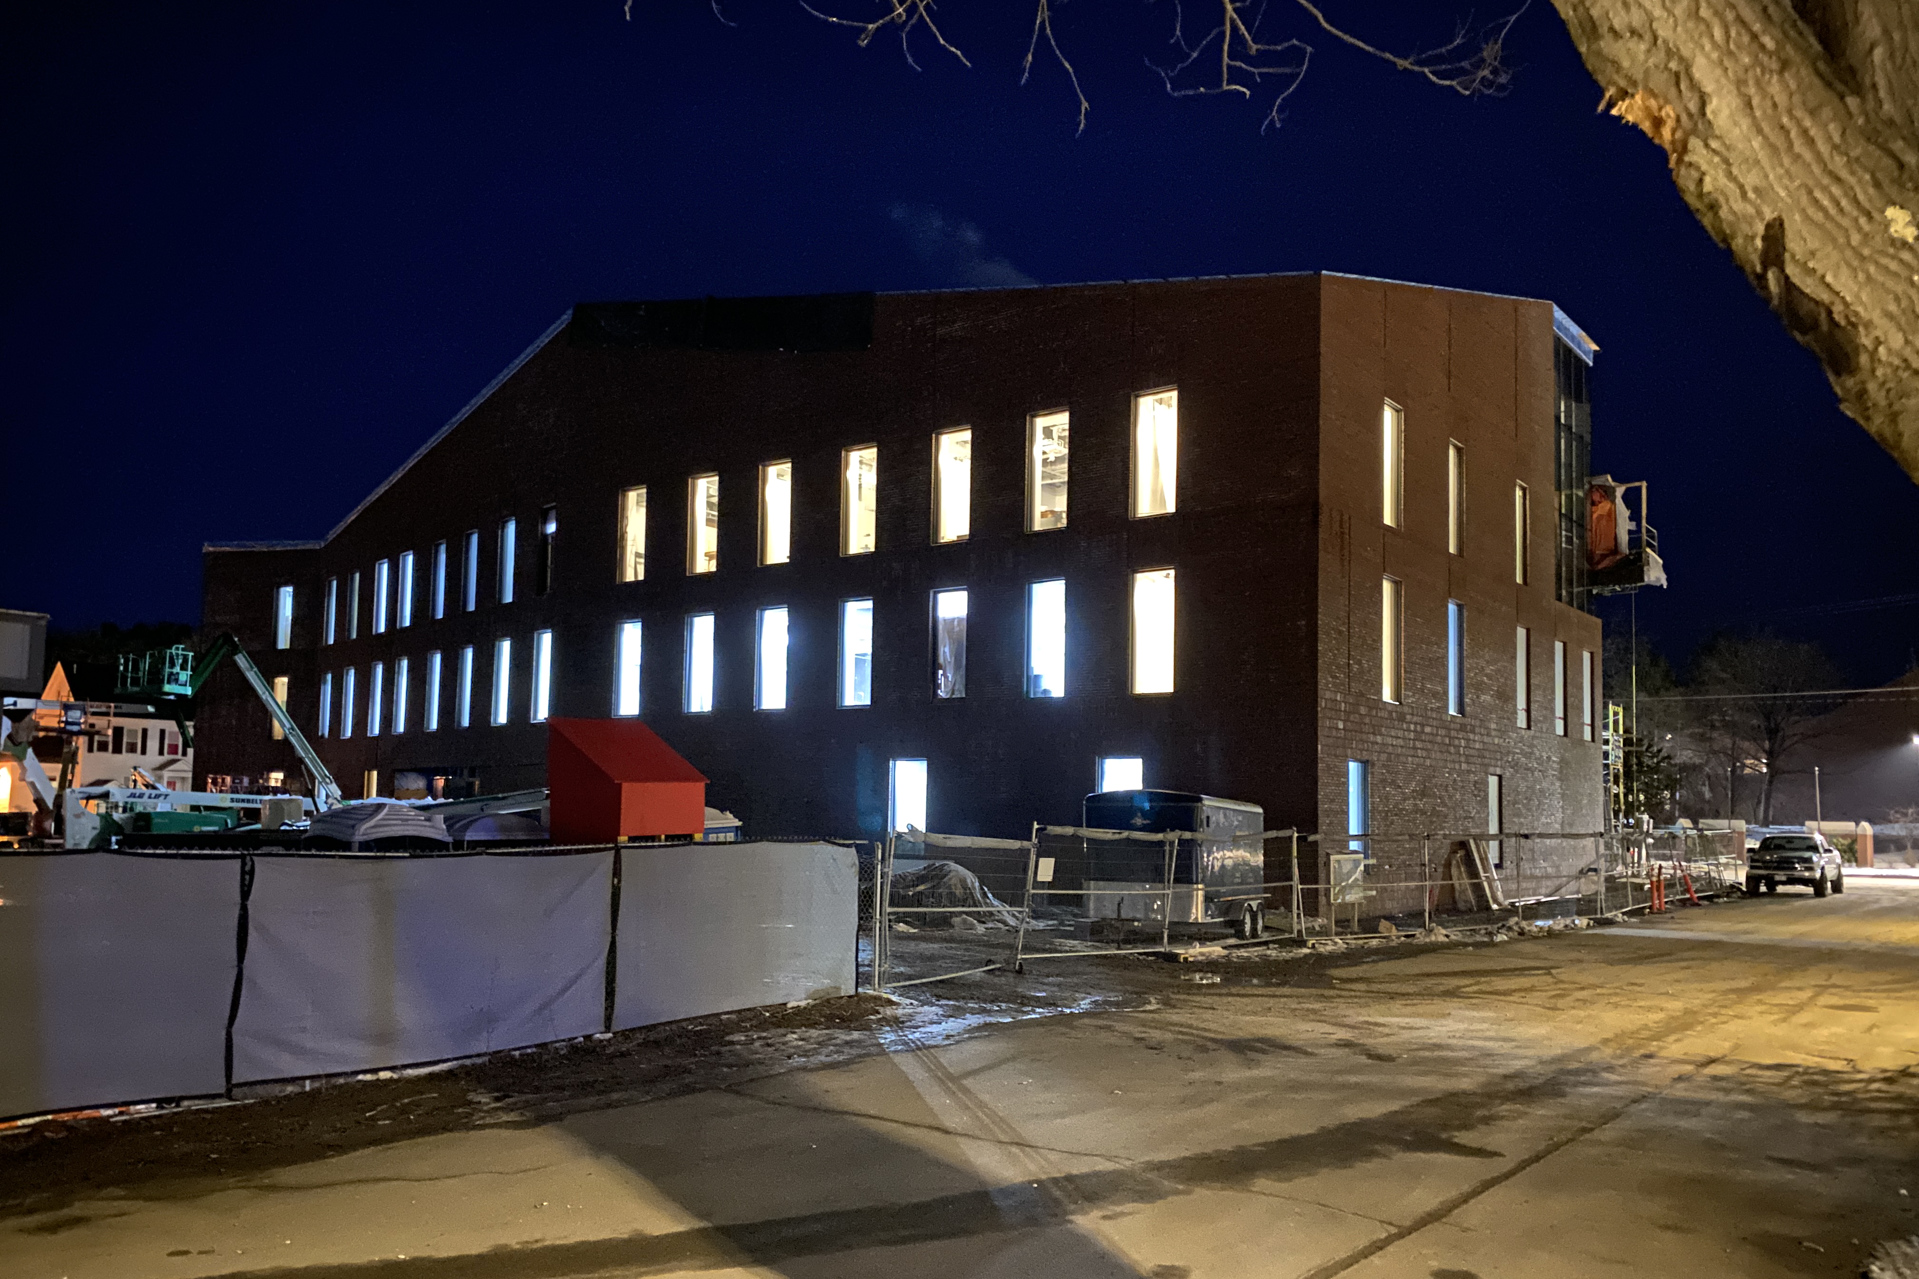 At 5:30 p.m. on Jan. 15, the Bonney Science Center is a bright spot on the edge of campus as painters, flooring installers, and other trades work the evening shift. (Geoff Swift/Bates College)